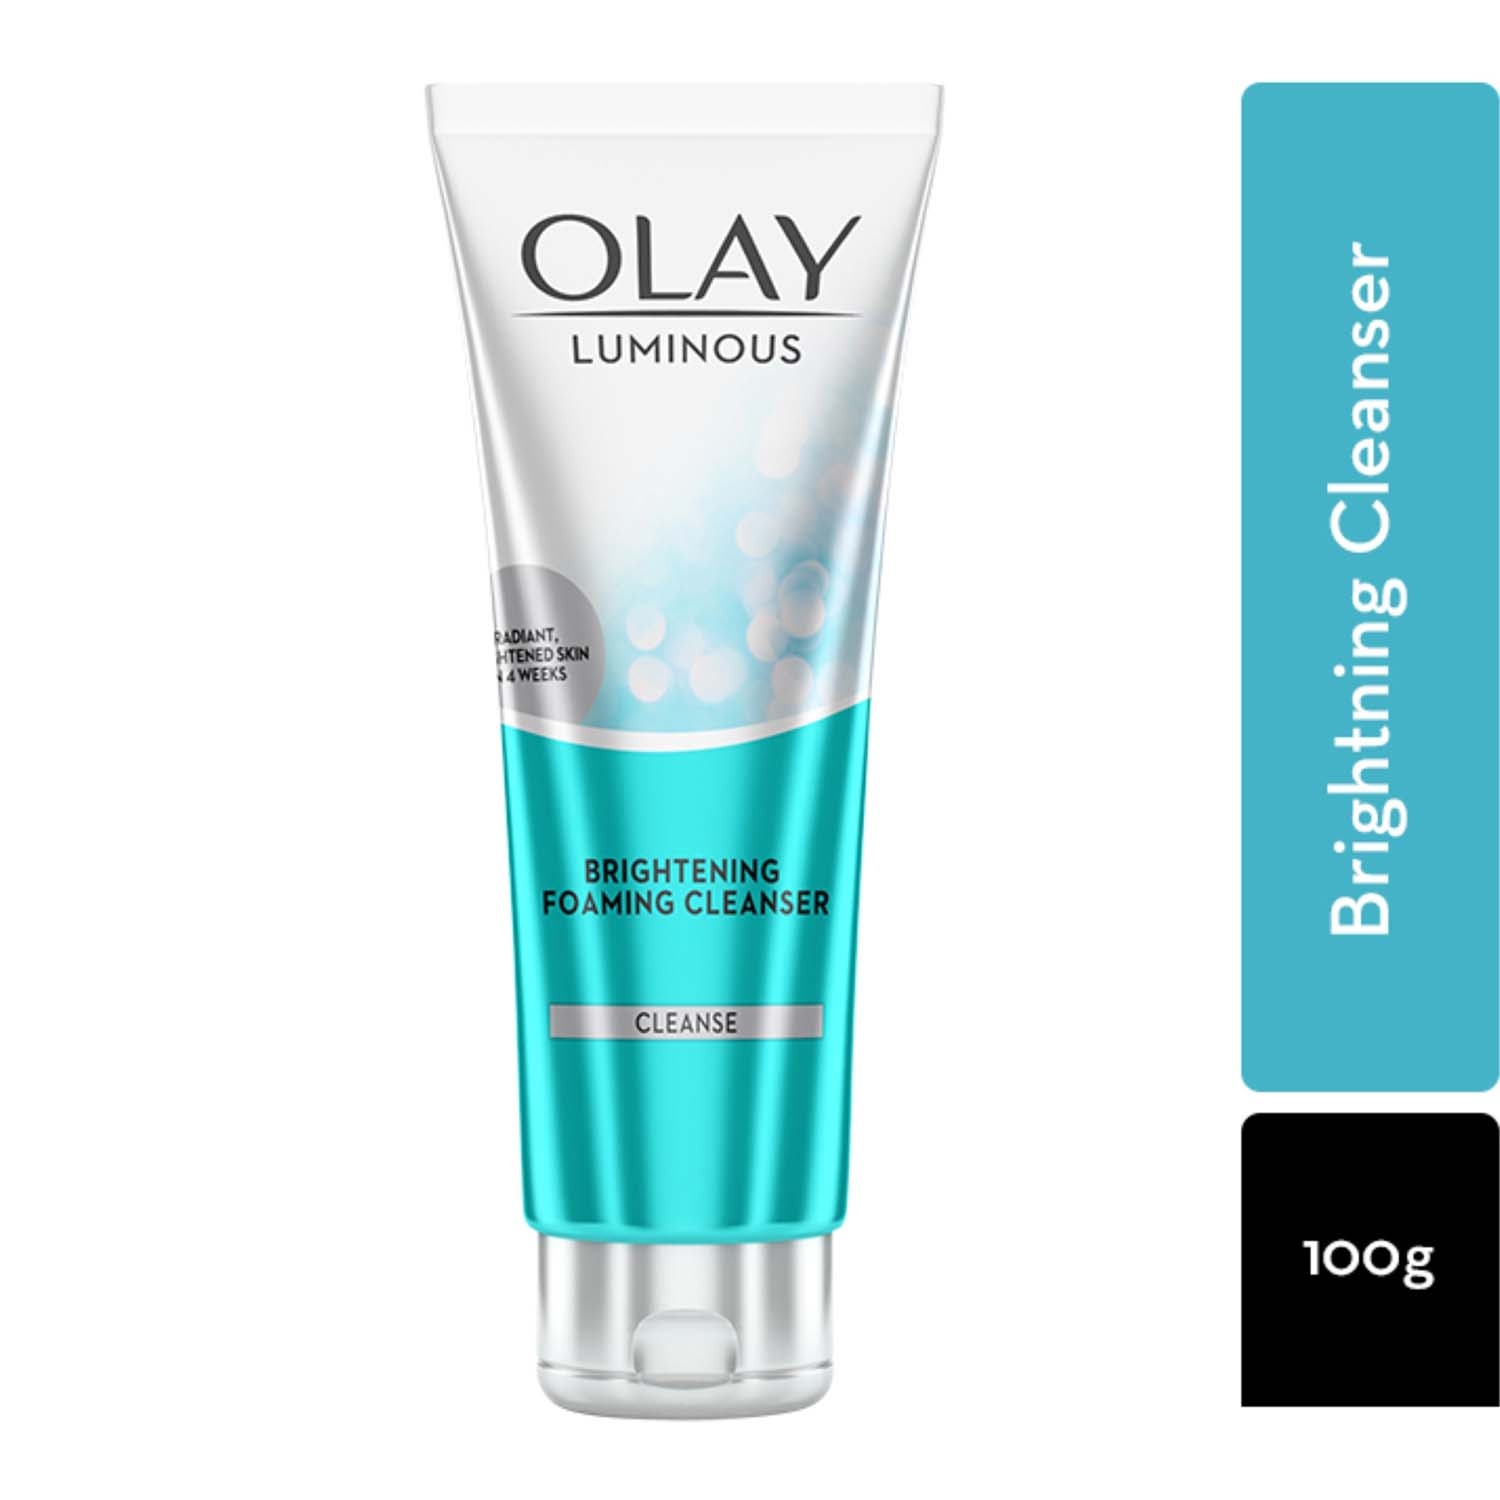 Olay | Olay Luminous Brightening Foaming Cleanser (100g)